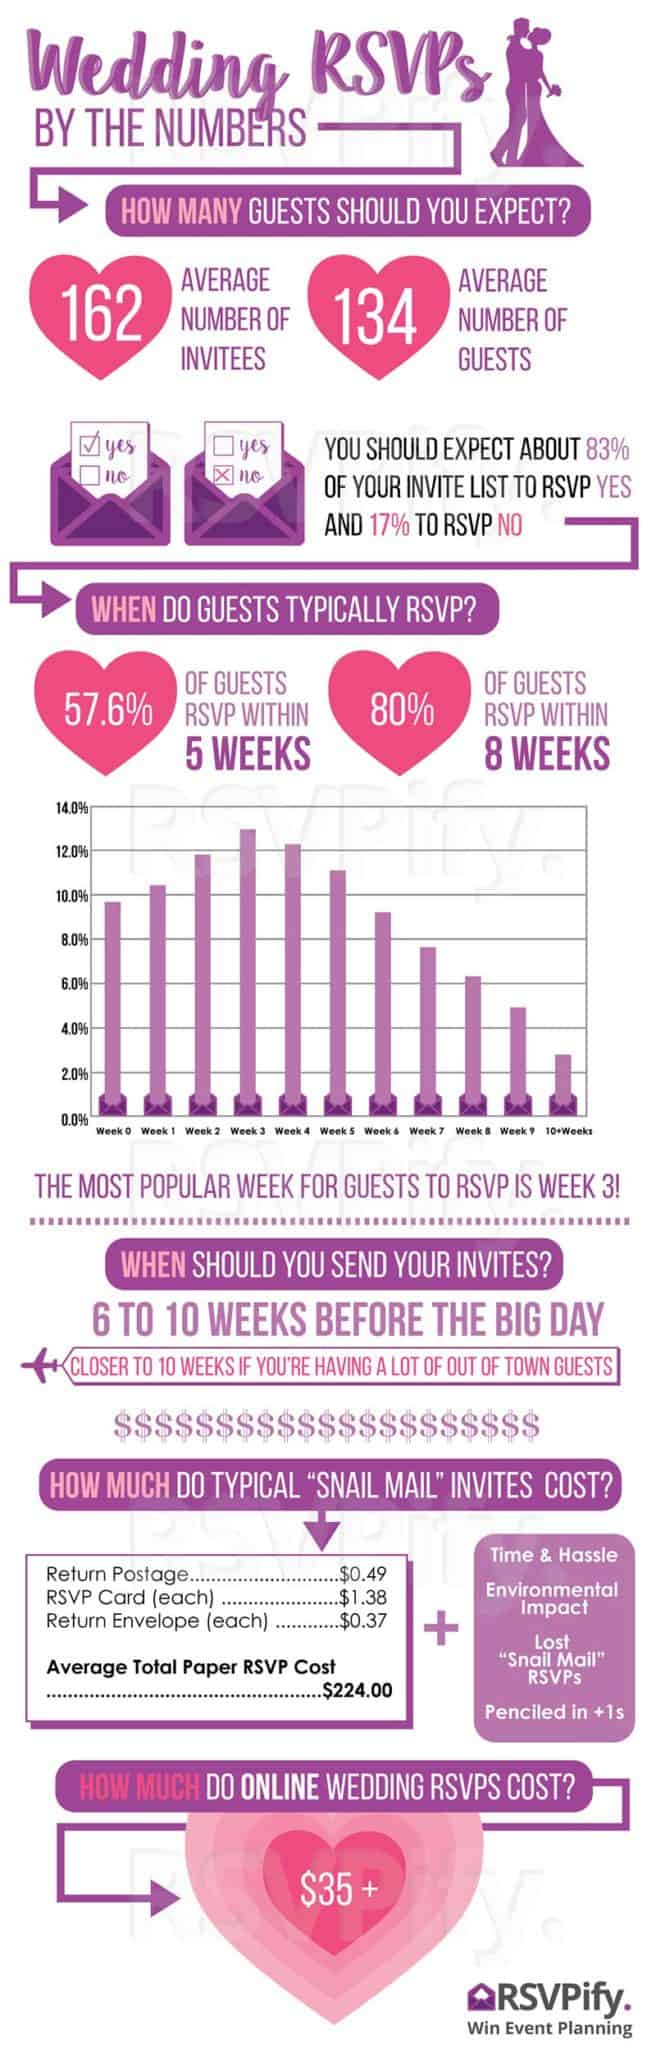 Infographic: Wedding RSVPs by the numbers with average wedding size, guest reply timelines and RSVP costs